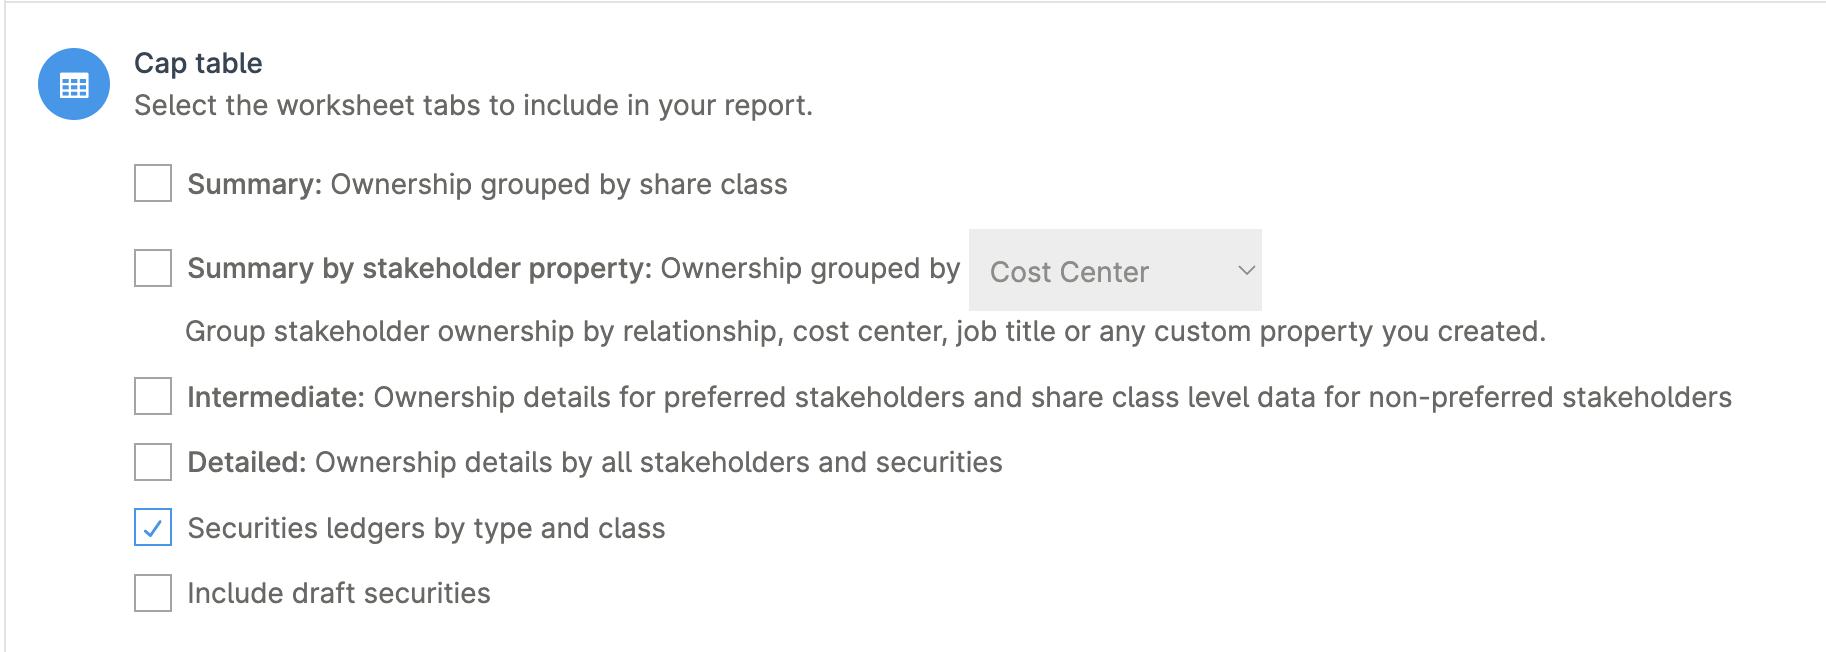 Carta screenshot with header 'Cap Table: Select the worksheet tabs to include in your report.' A checkbox next to 'Securities ledgers by type and class' is selected.